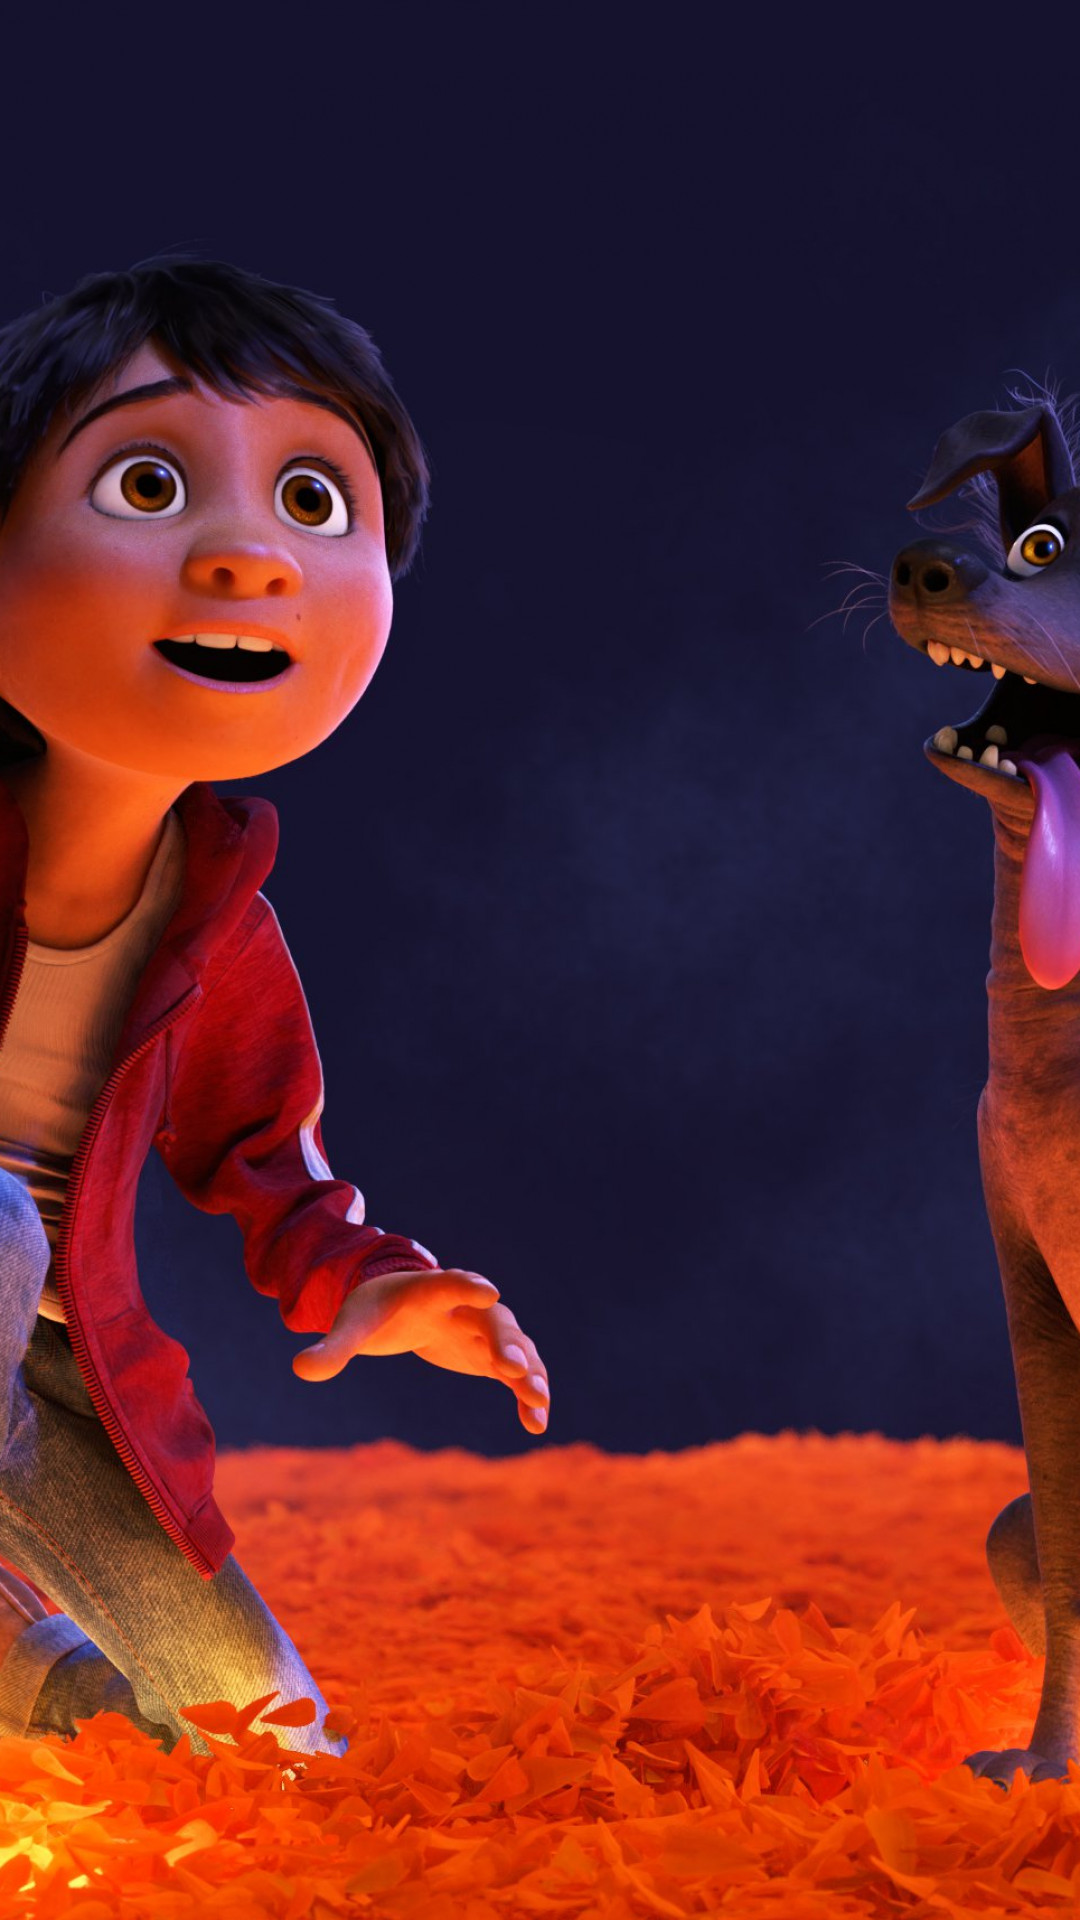 Wallpaper Coco, dog, best animation movies, Movies #13204